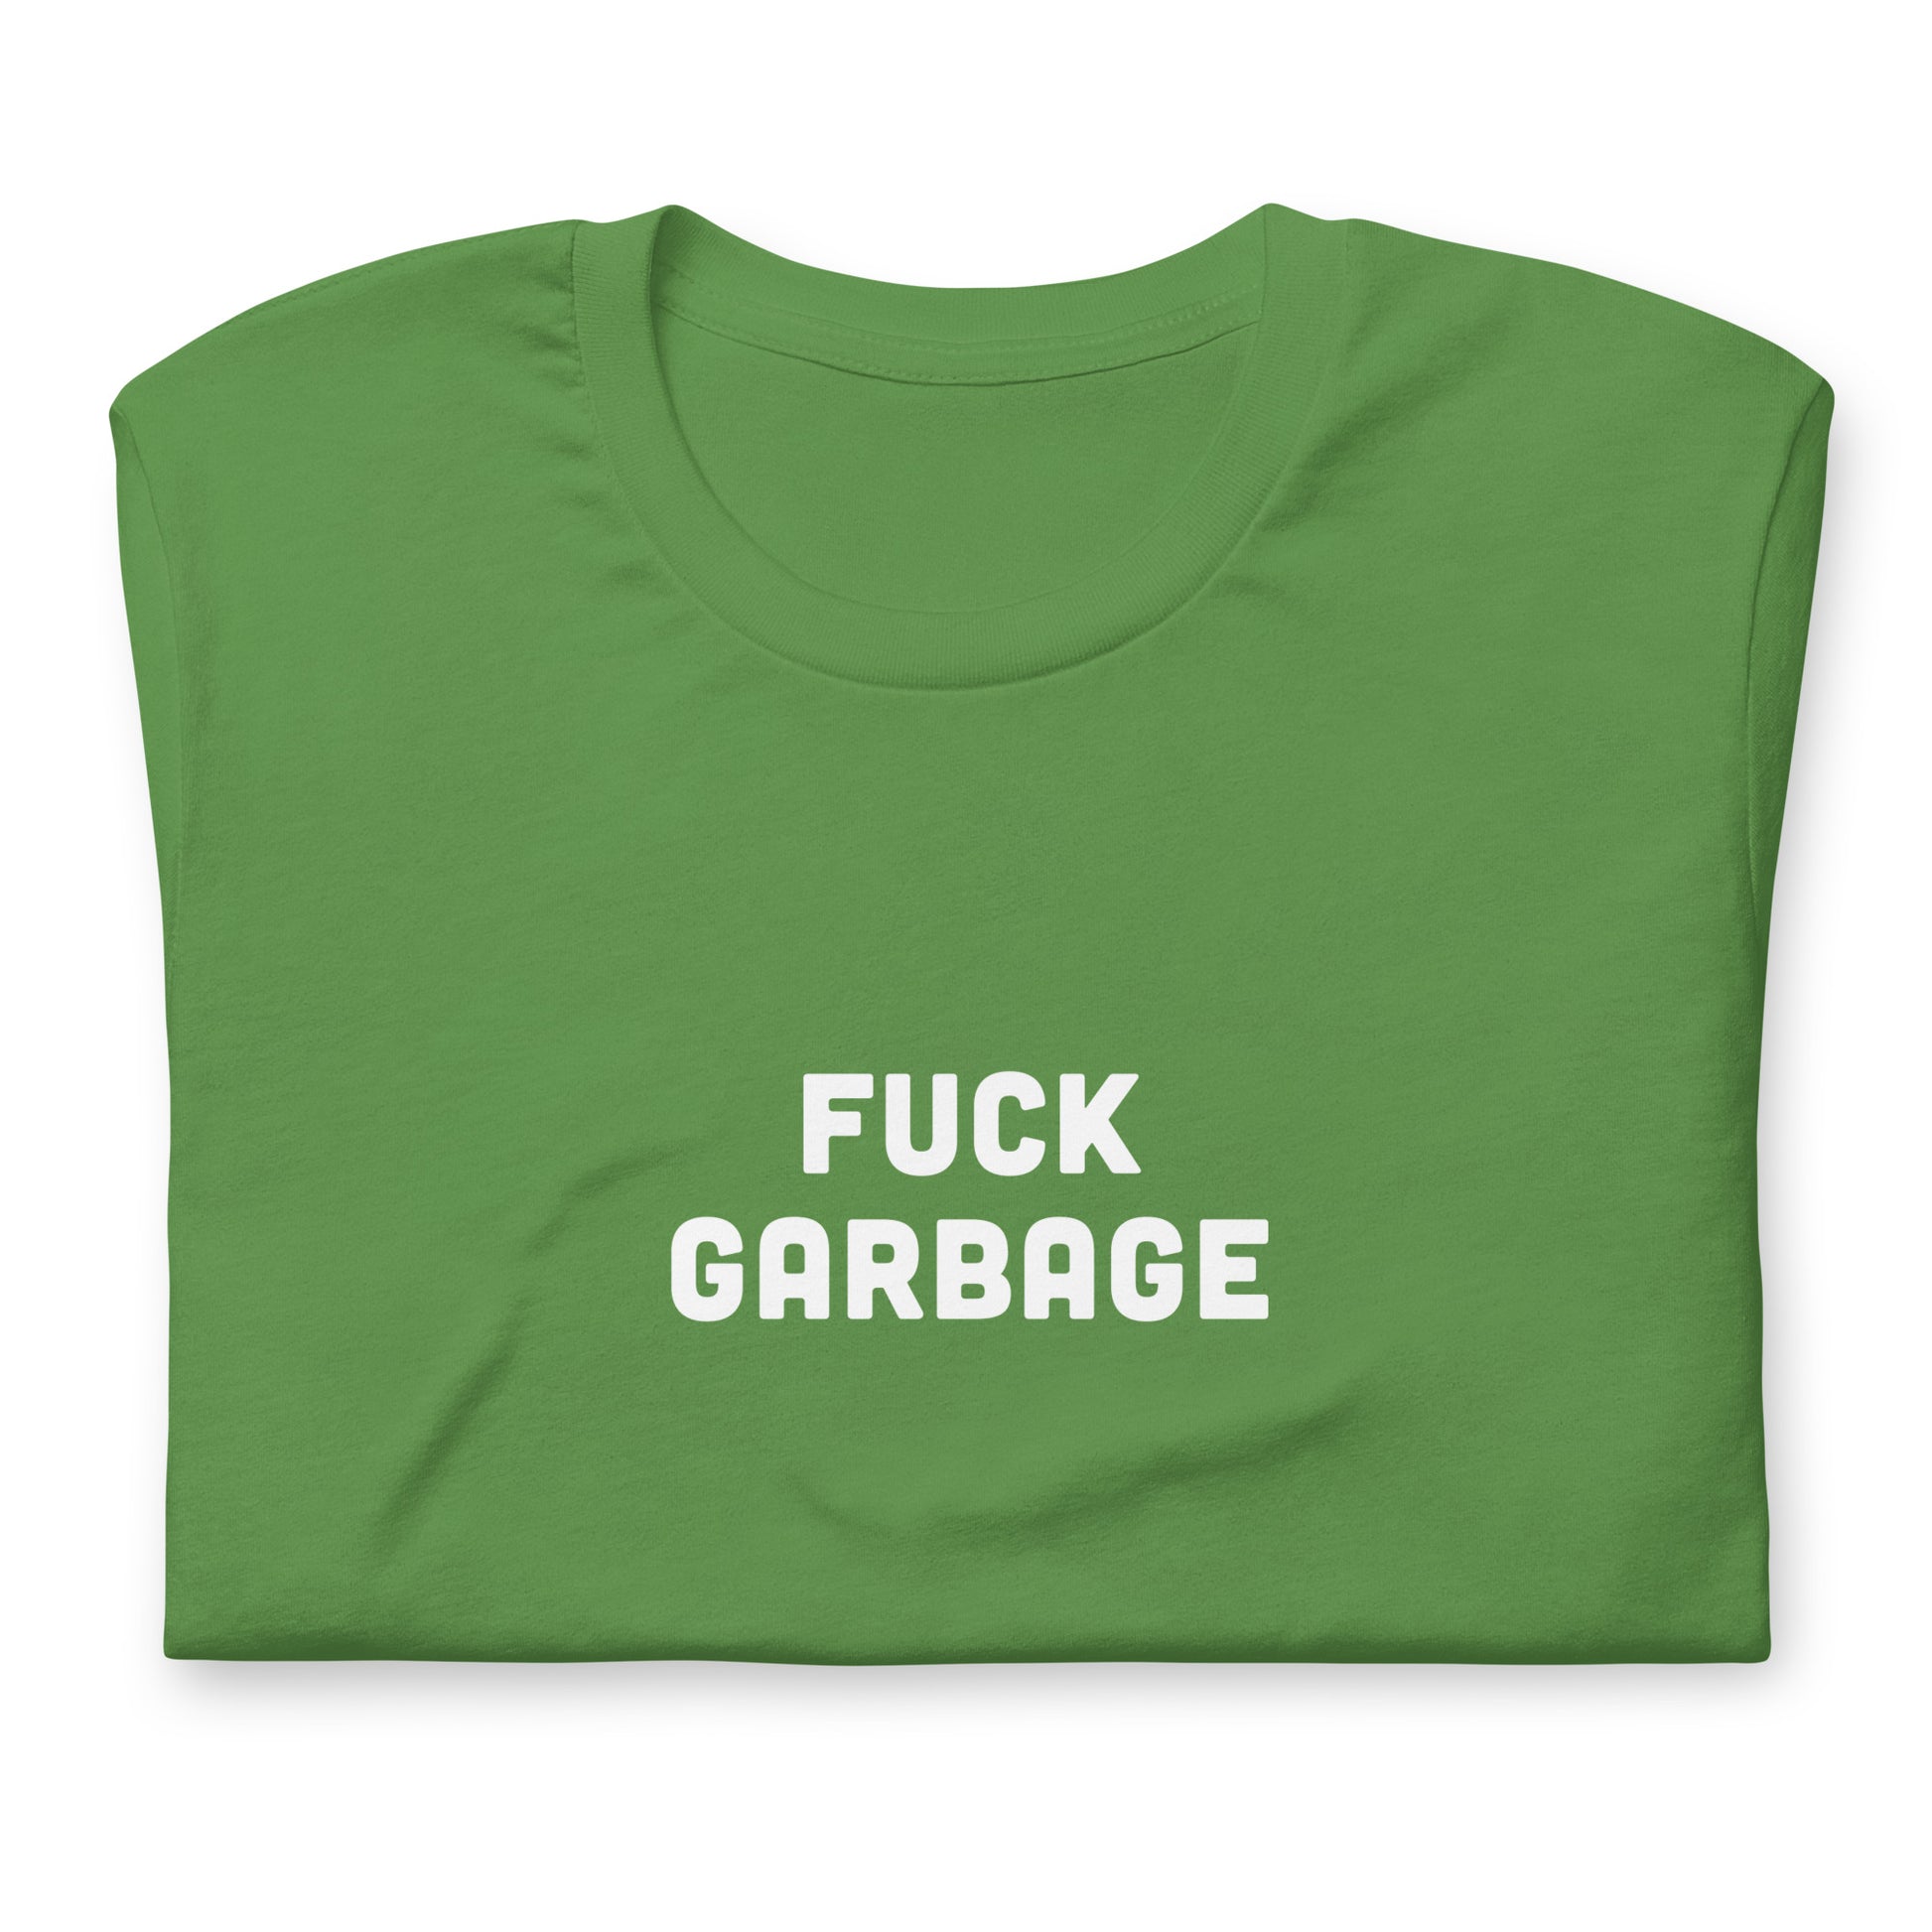 Fuck Garbage T-Shirt Size 2XL Color Navy